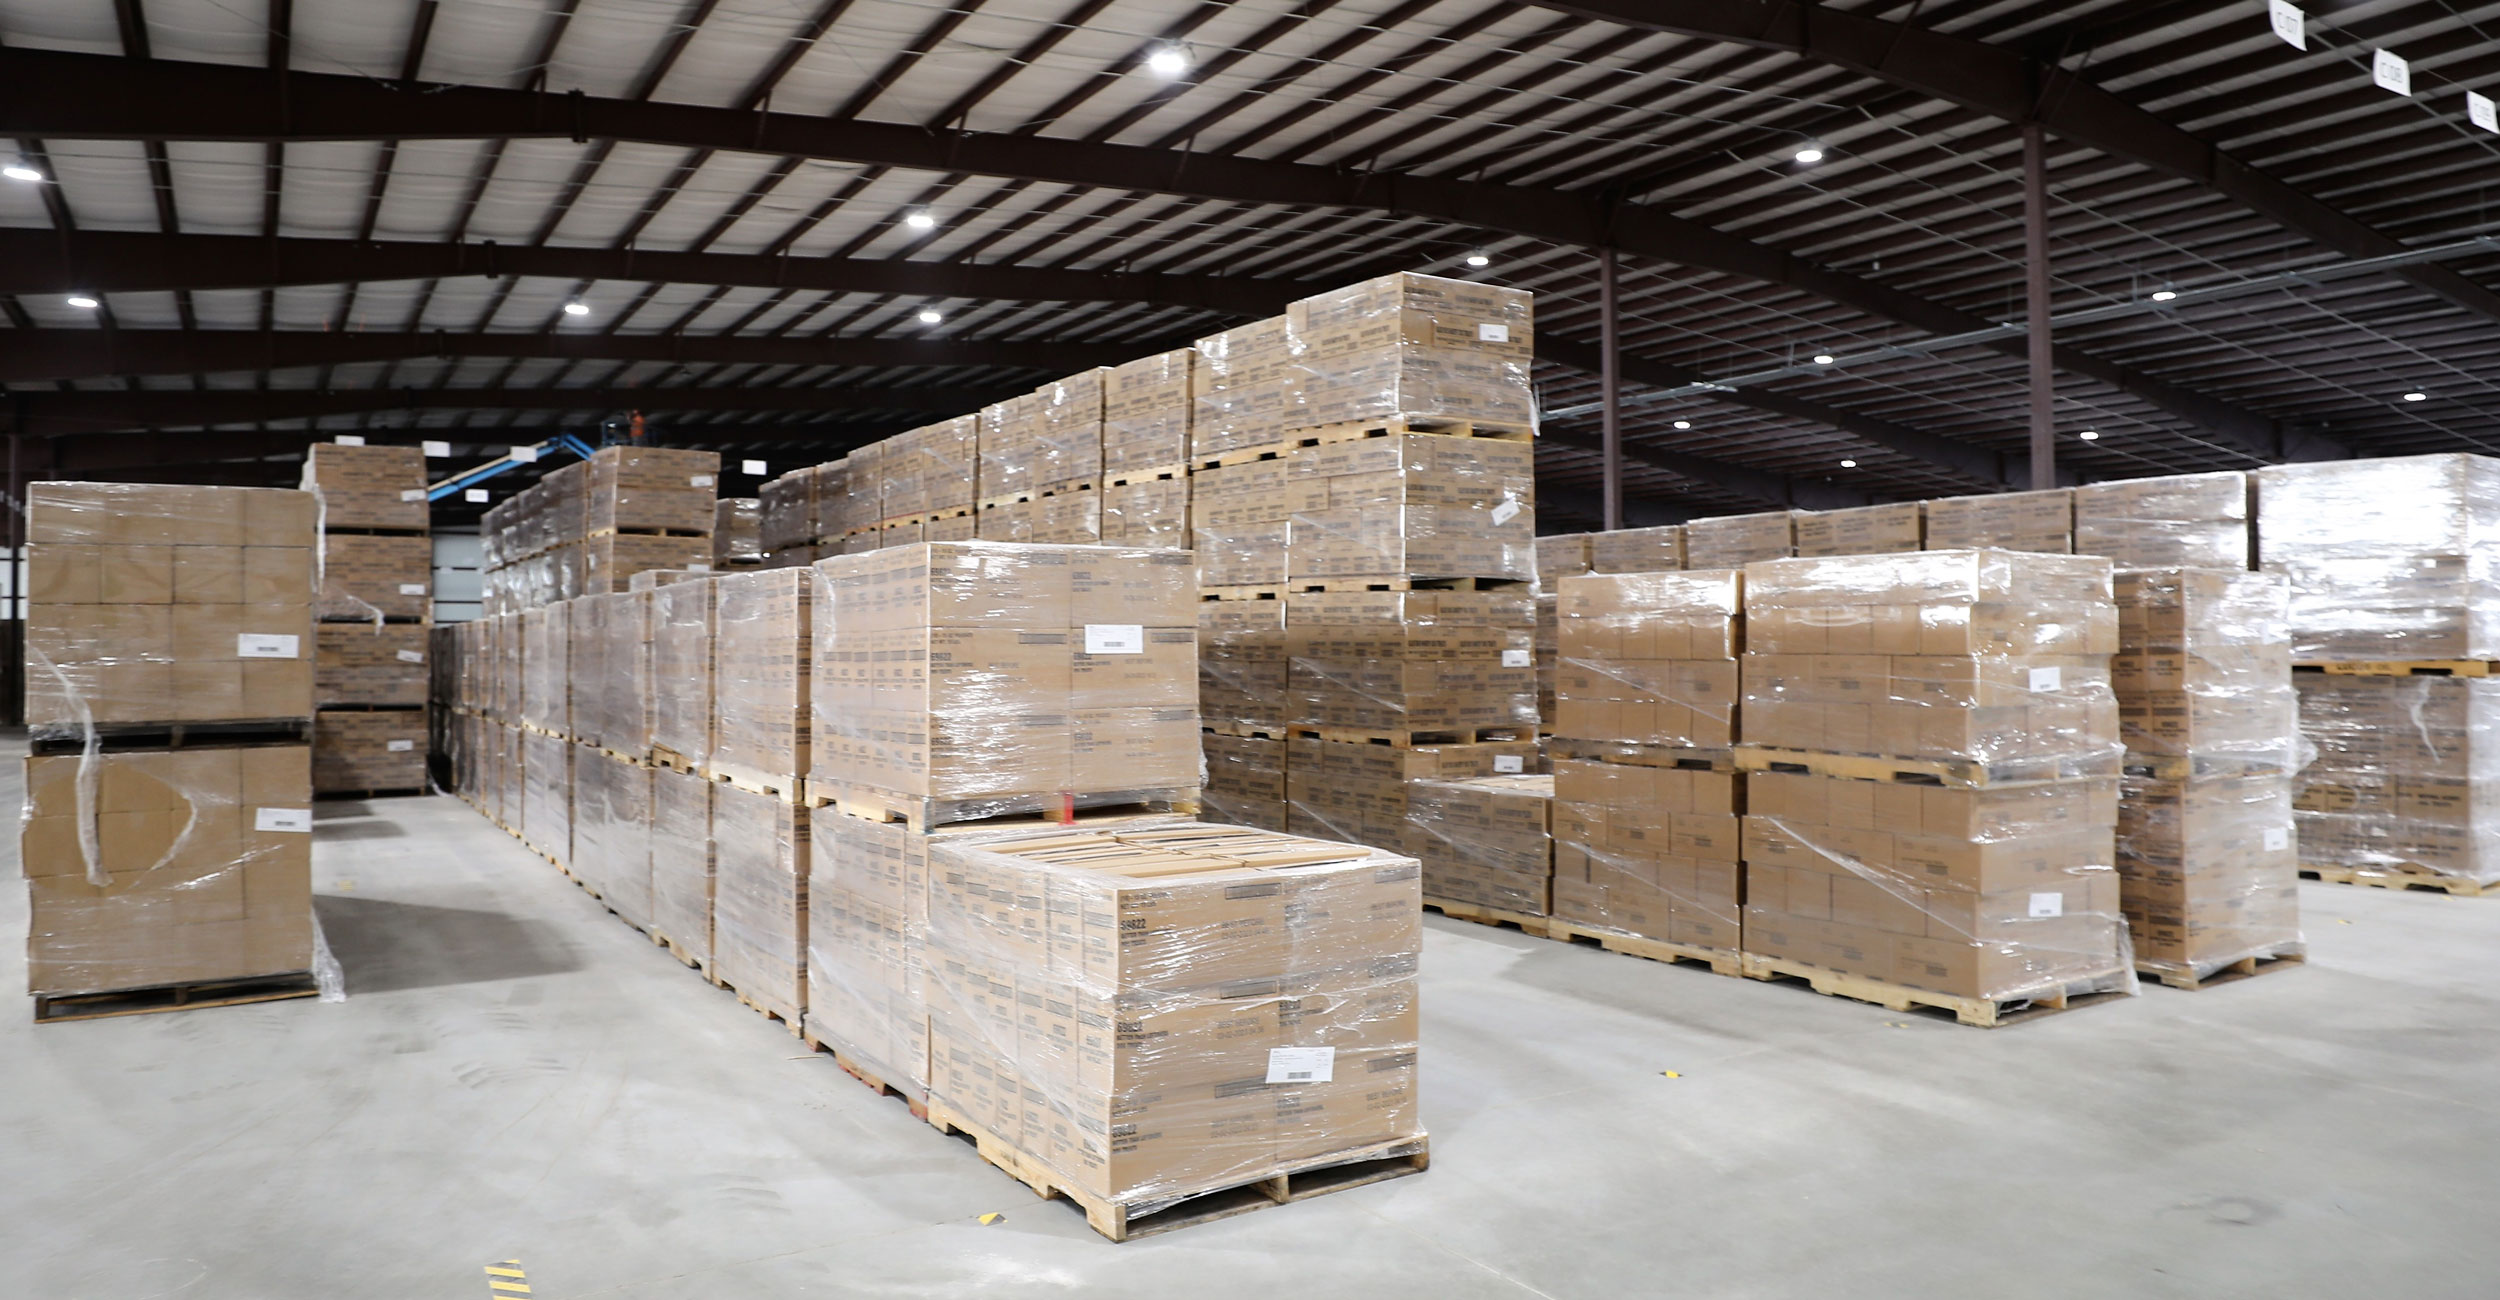 The Mountain Country Foods shipping warehouse in Okeene, Oklahoma, ships 8-10 full semi loads around the world each day.